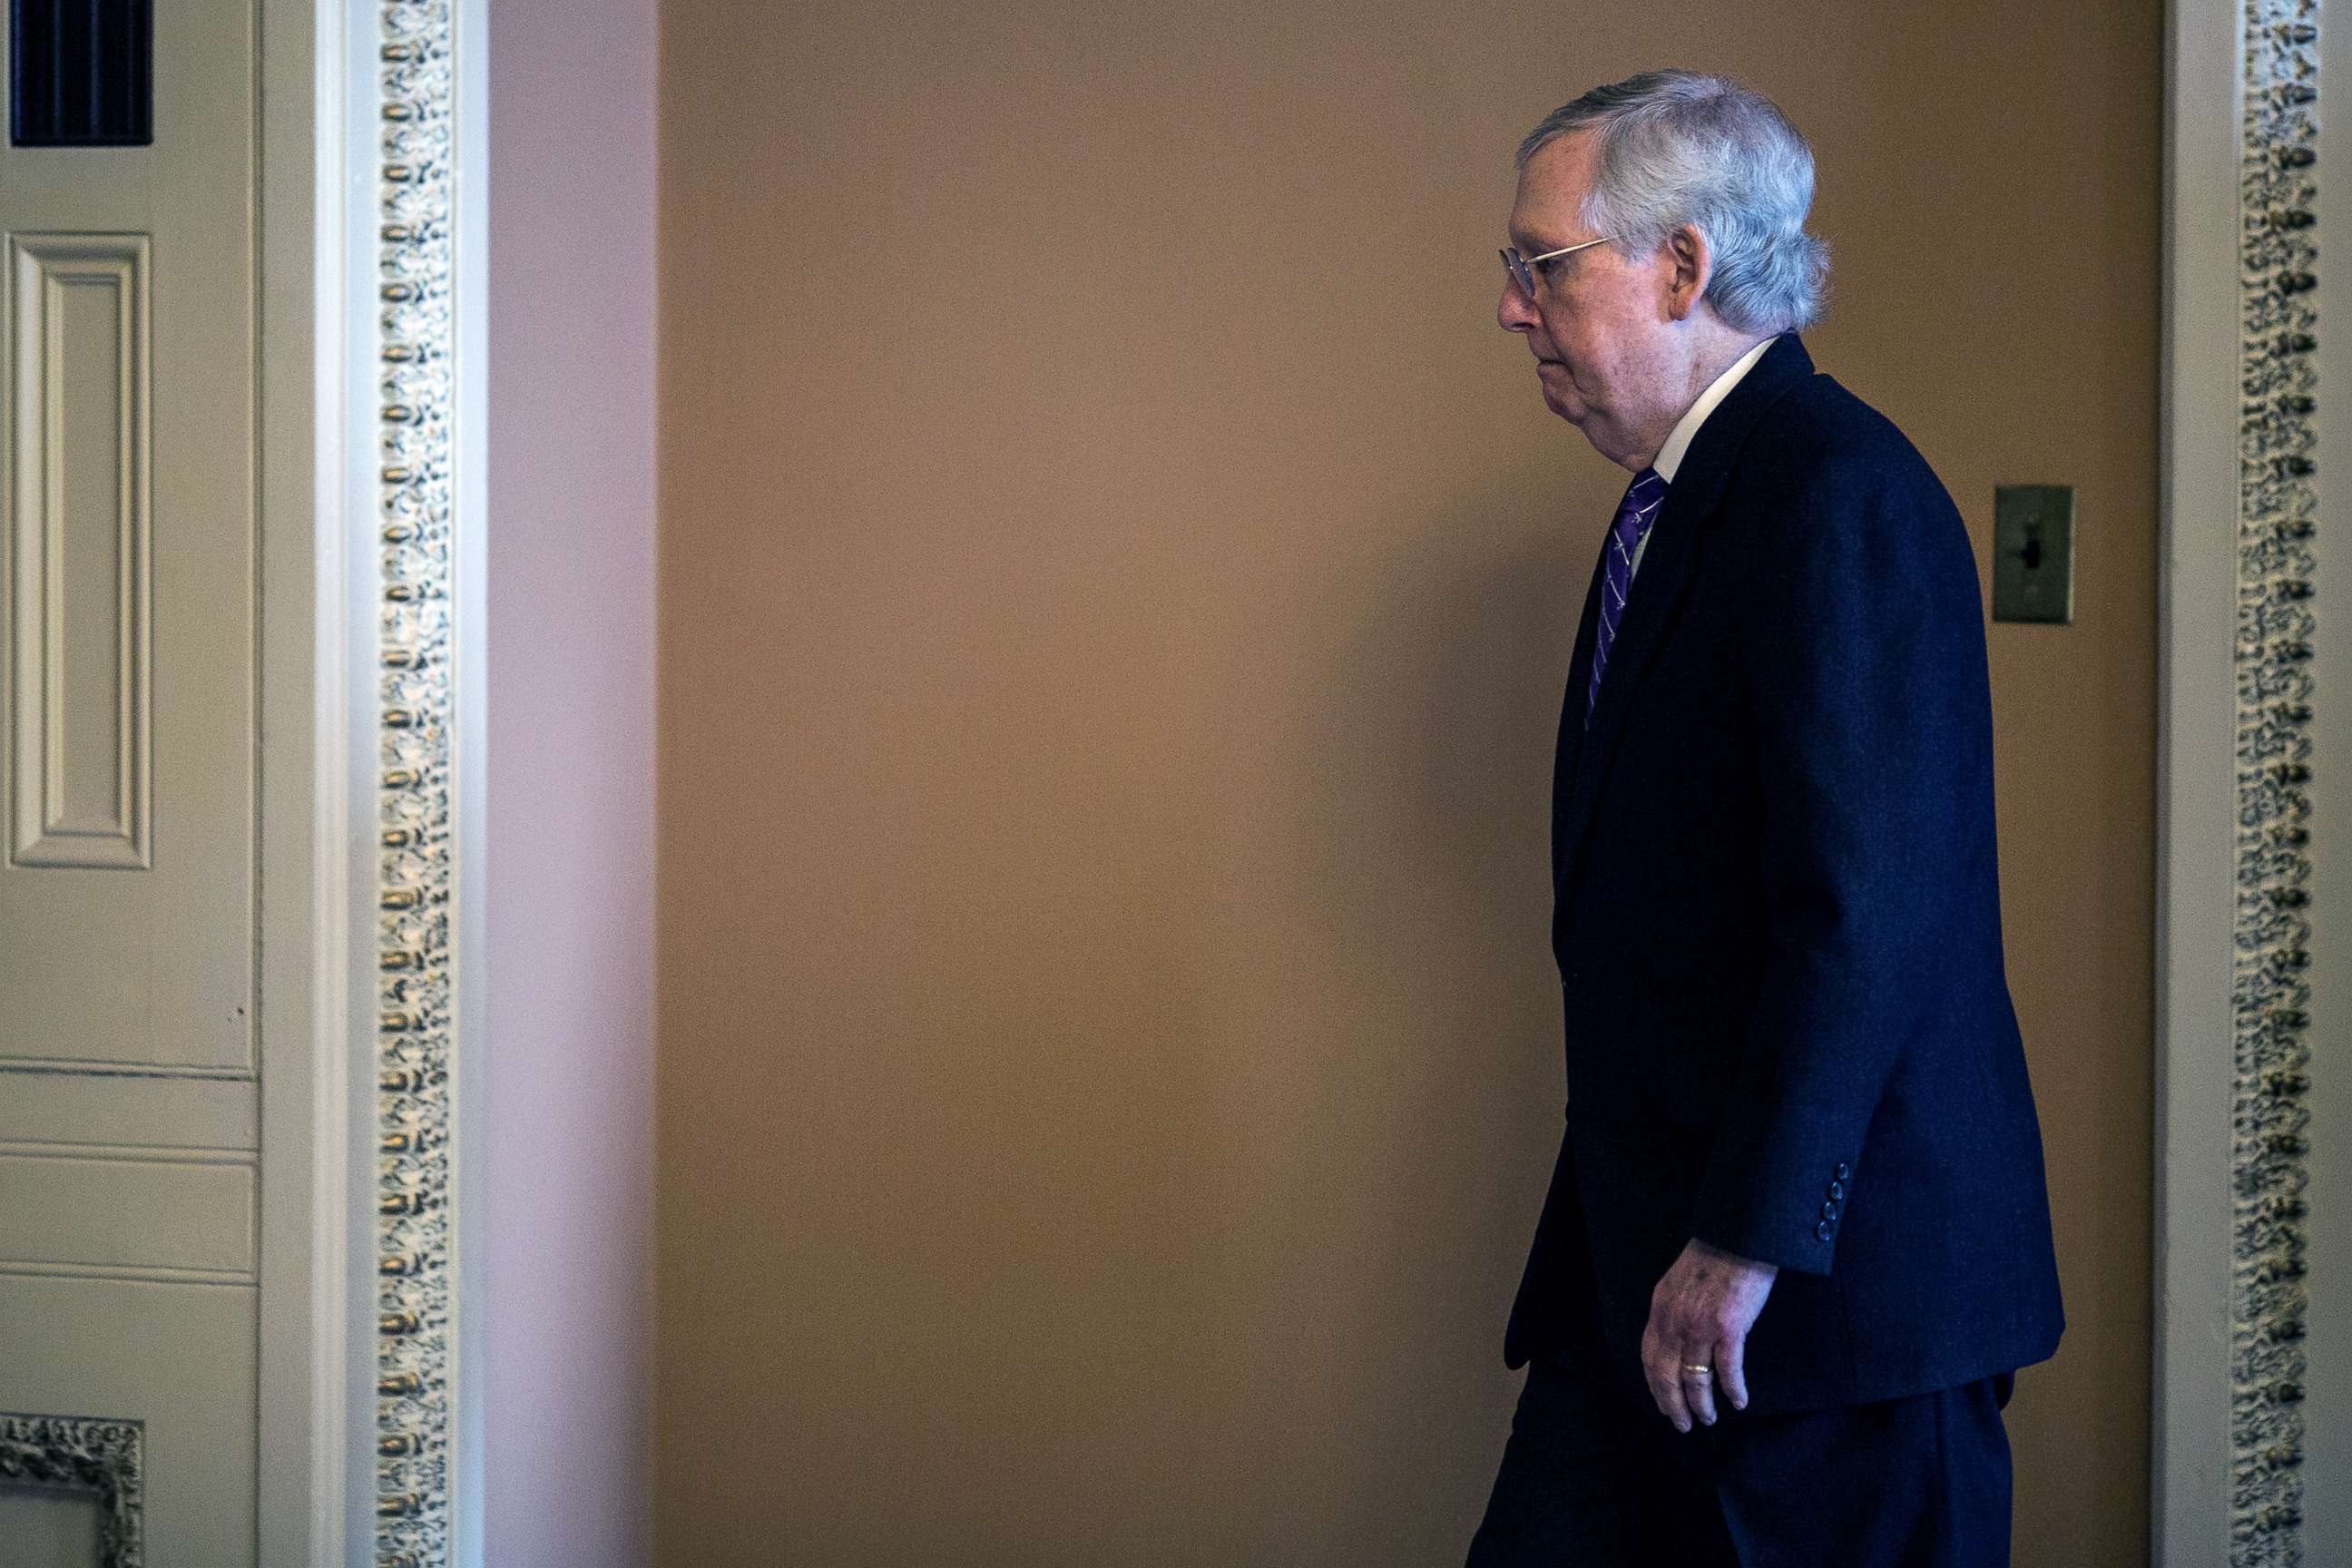 PHOTO: Senate Majority Leader Mitch McConnell walks through the Capitol during the Senate impeachment trial of President Donald Trump, Jan. 29, 2020 in Washington, D.C.